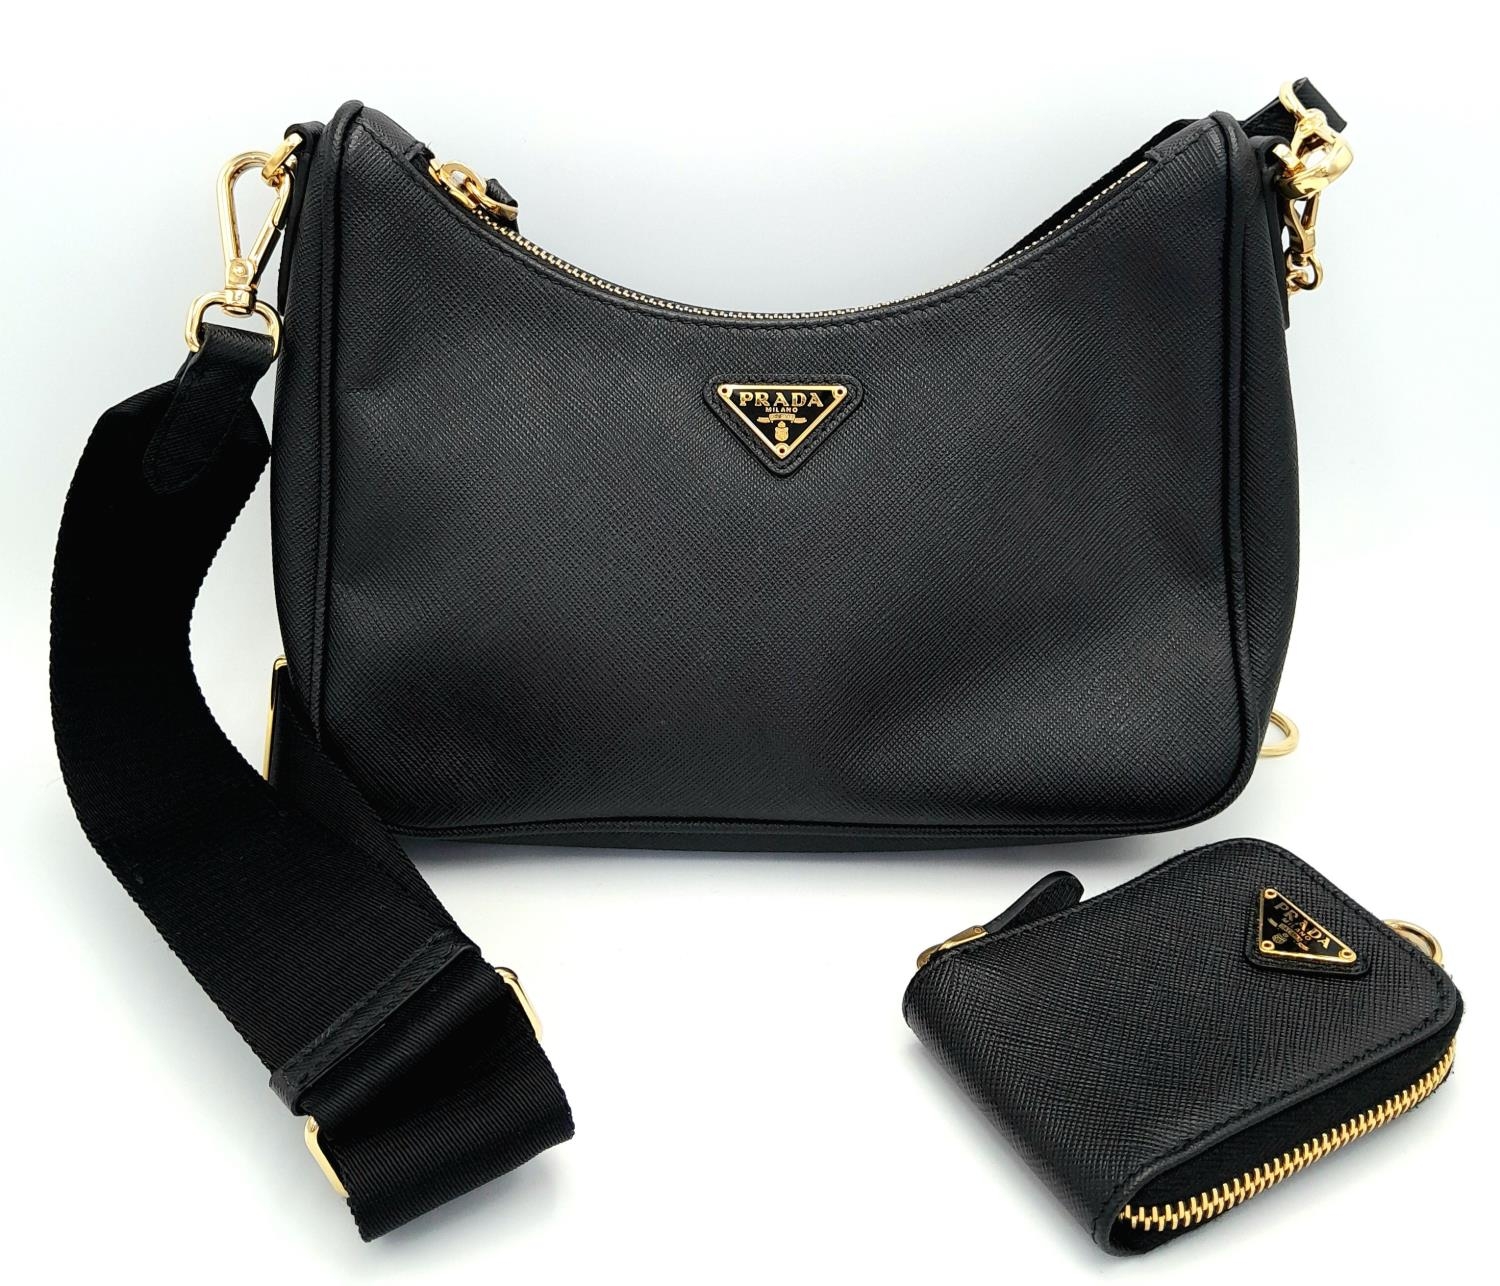 A Prada Black Re-Edition 2005 Bag. Saffiano leather exterior with gold-toned hardware, zip top